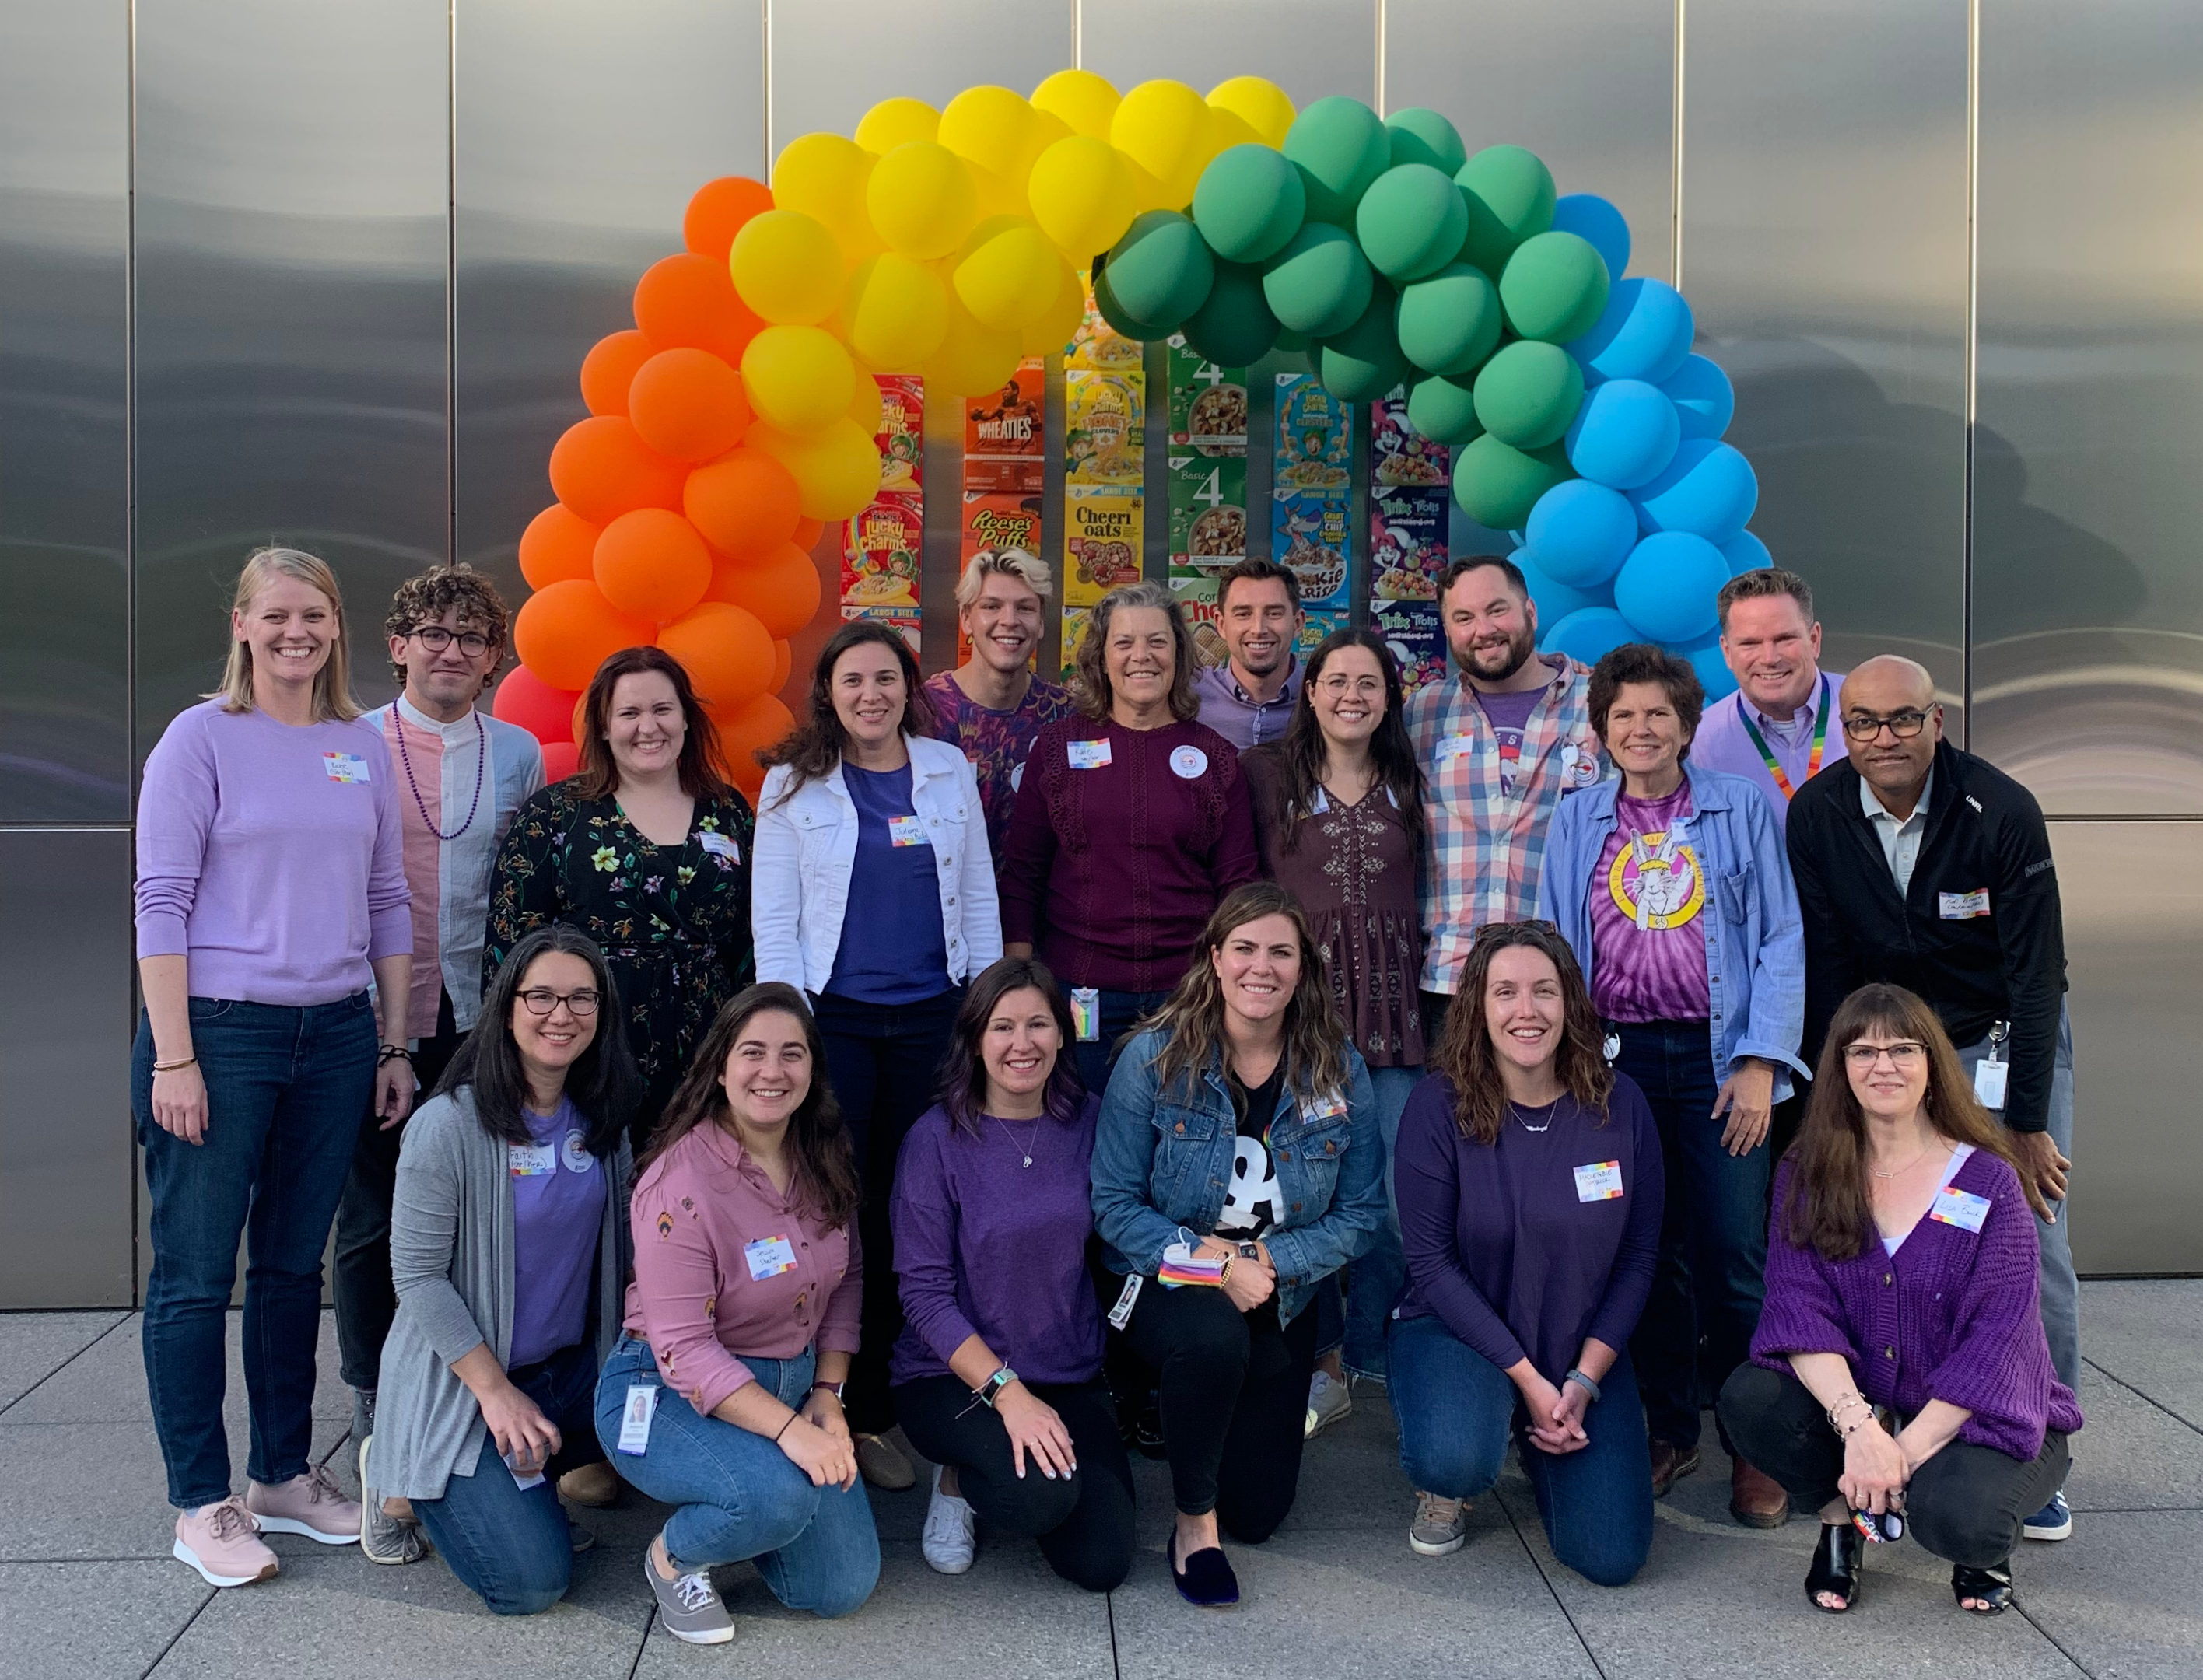 Betty's Family employee network celebrating National Coming Out Day